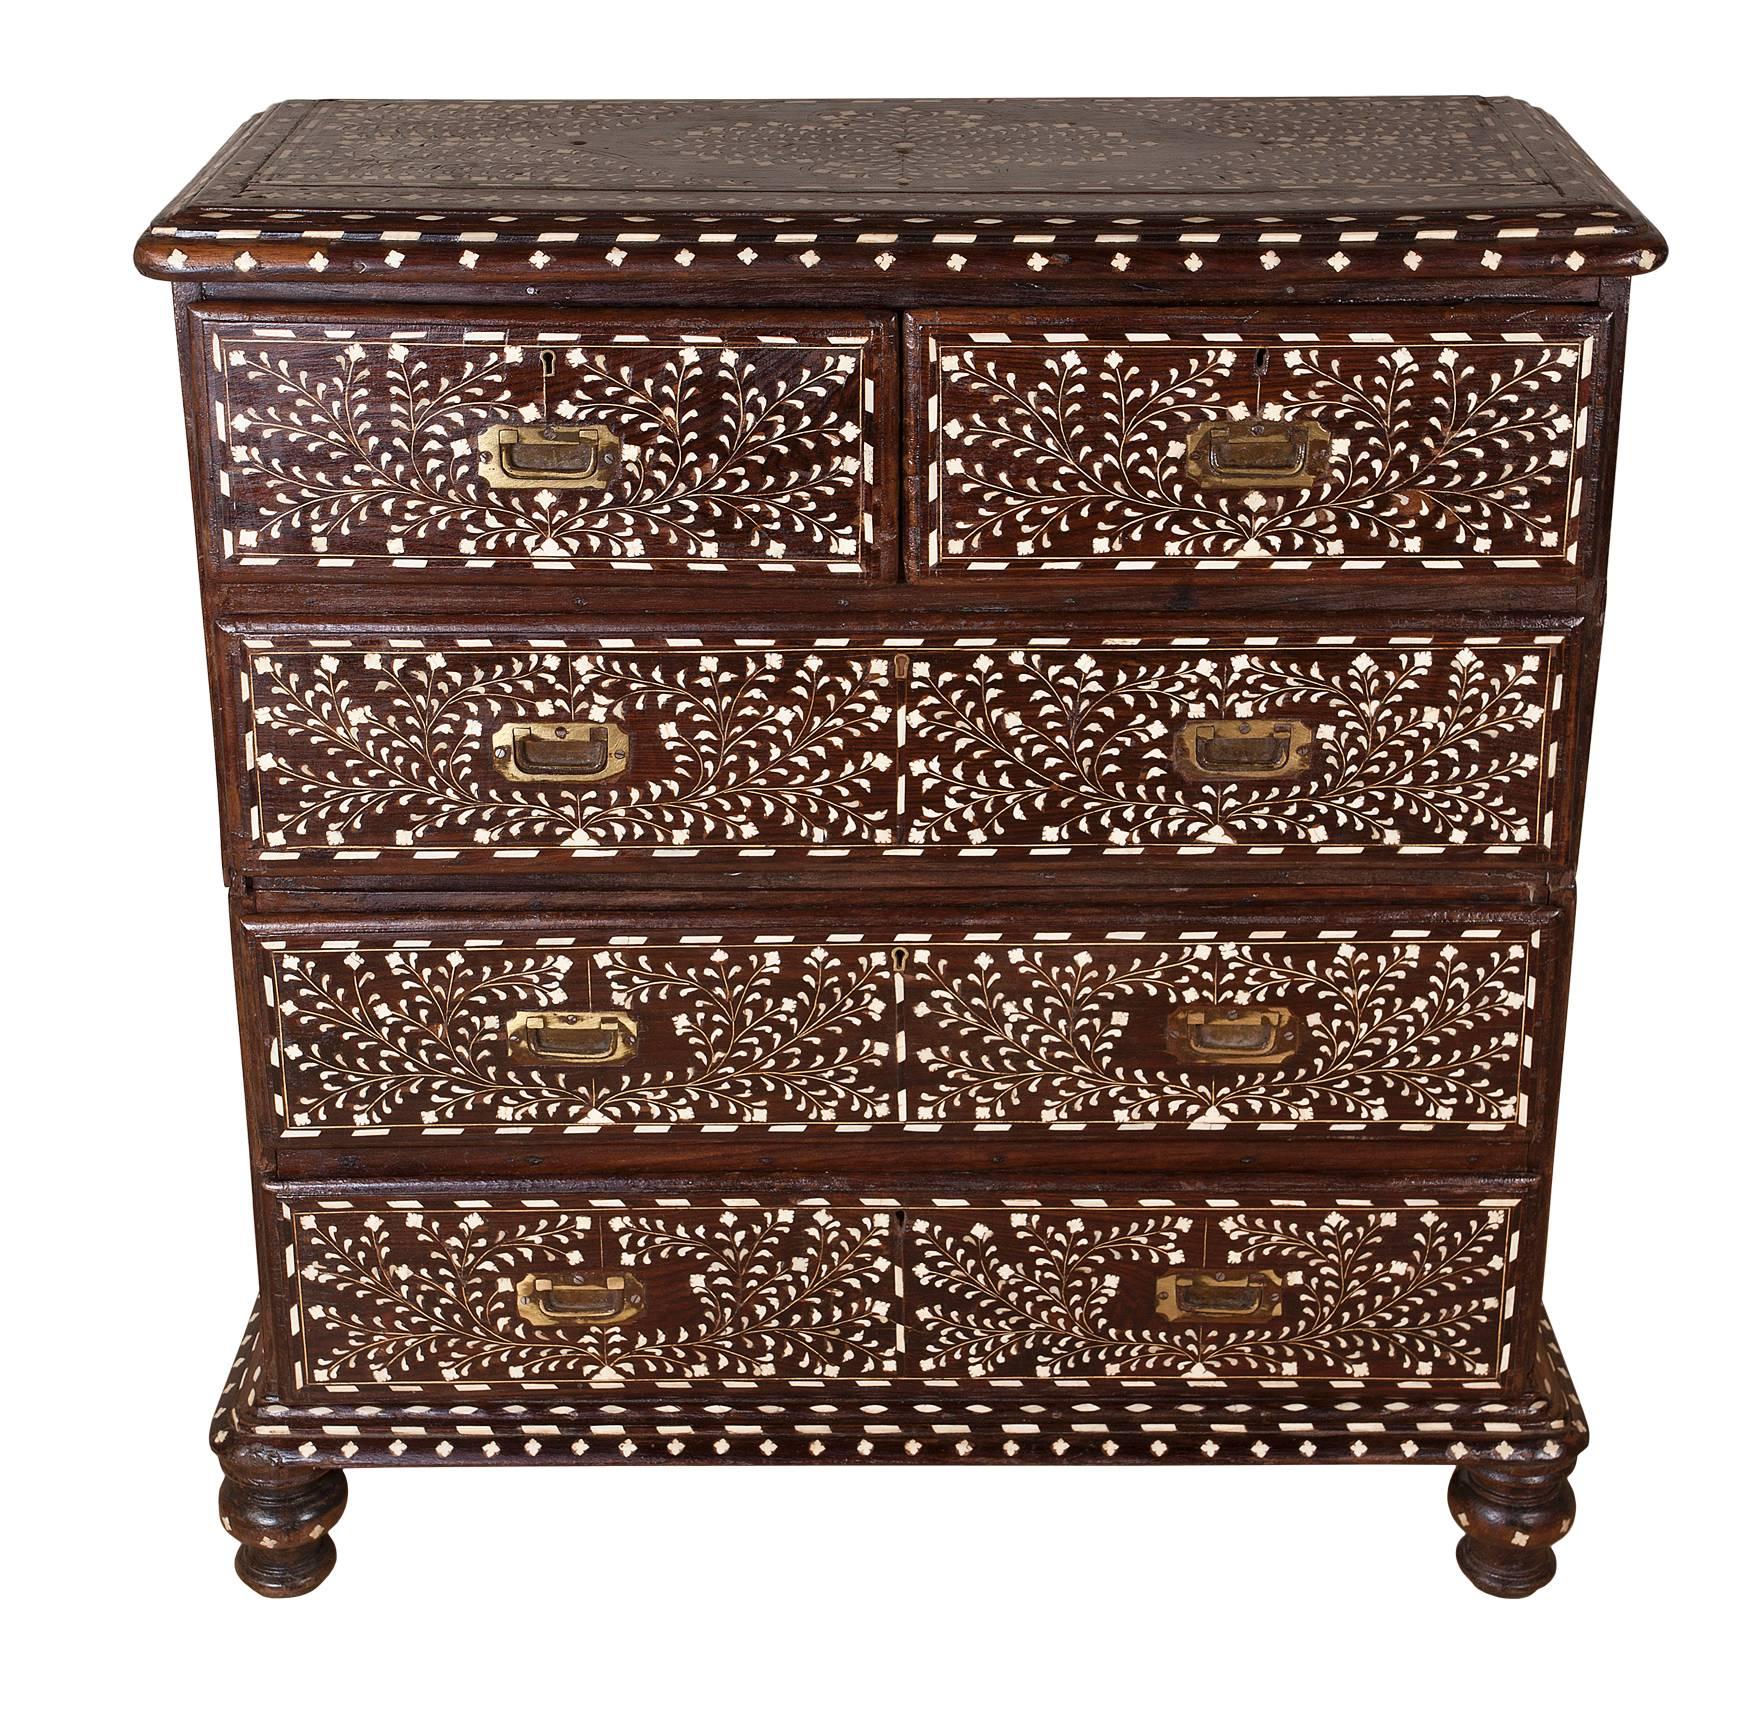 British Campaign with a twist! This is an exceptional late 19th century Campaign rosewood chest of drawers .....two parts, flush brass drawer pulls....but with highly intricate bone inlay. The inlay design is done in very small and shaped pieces in